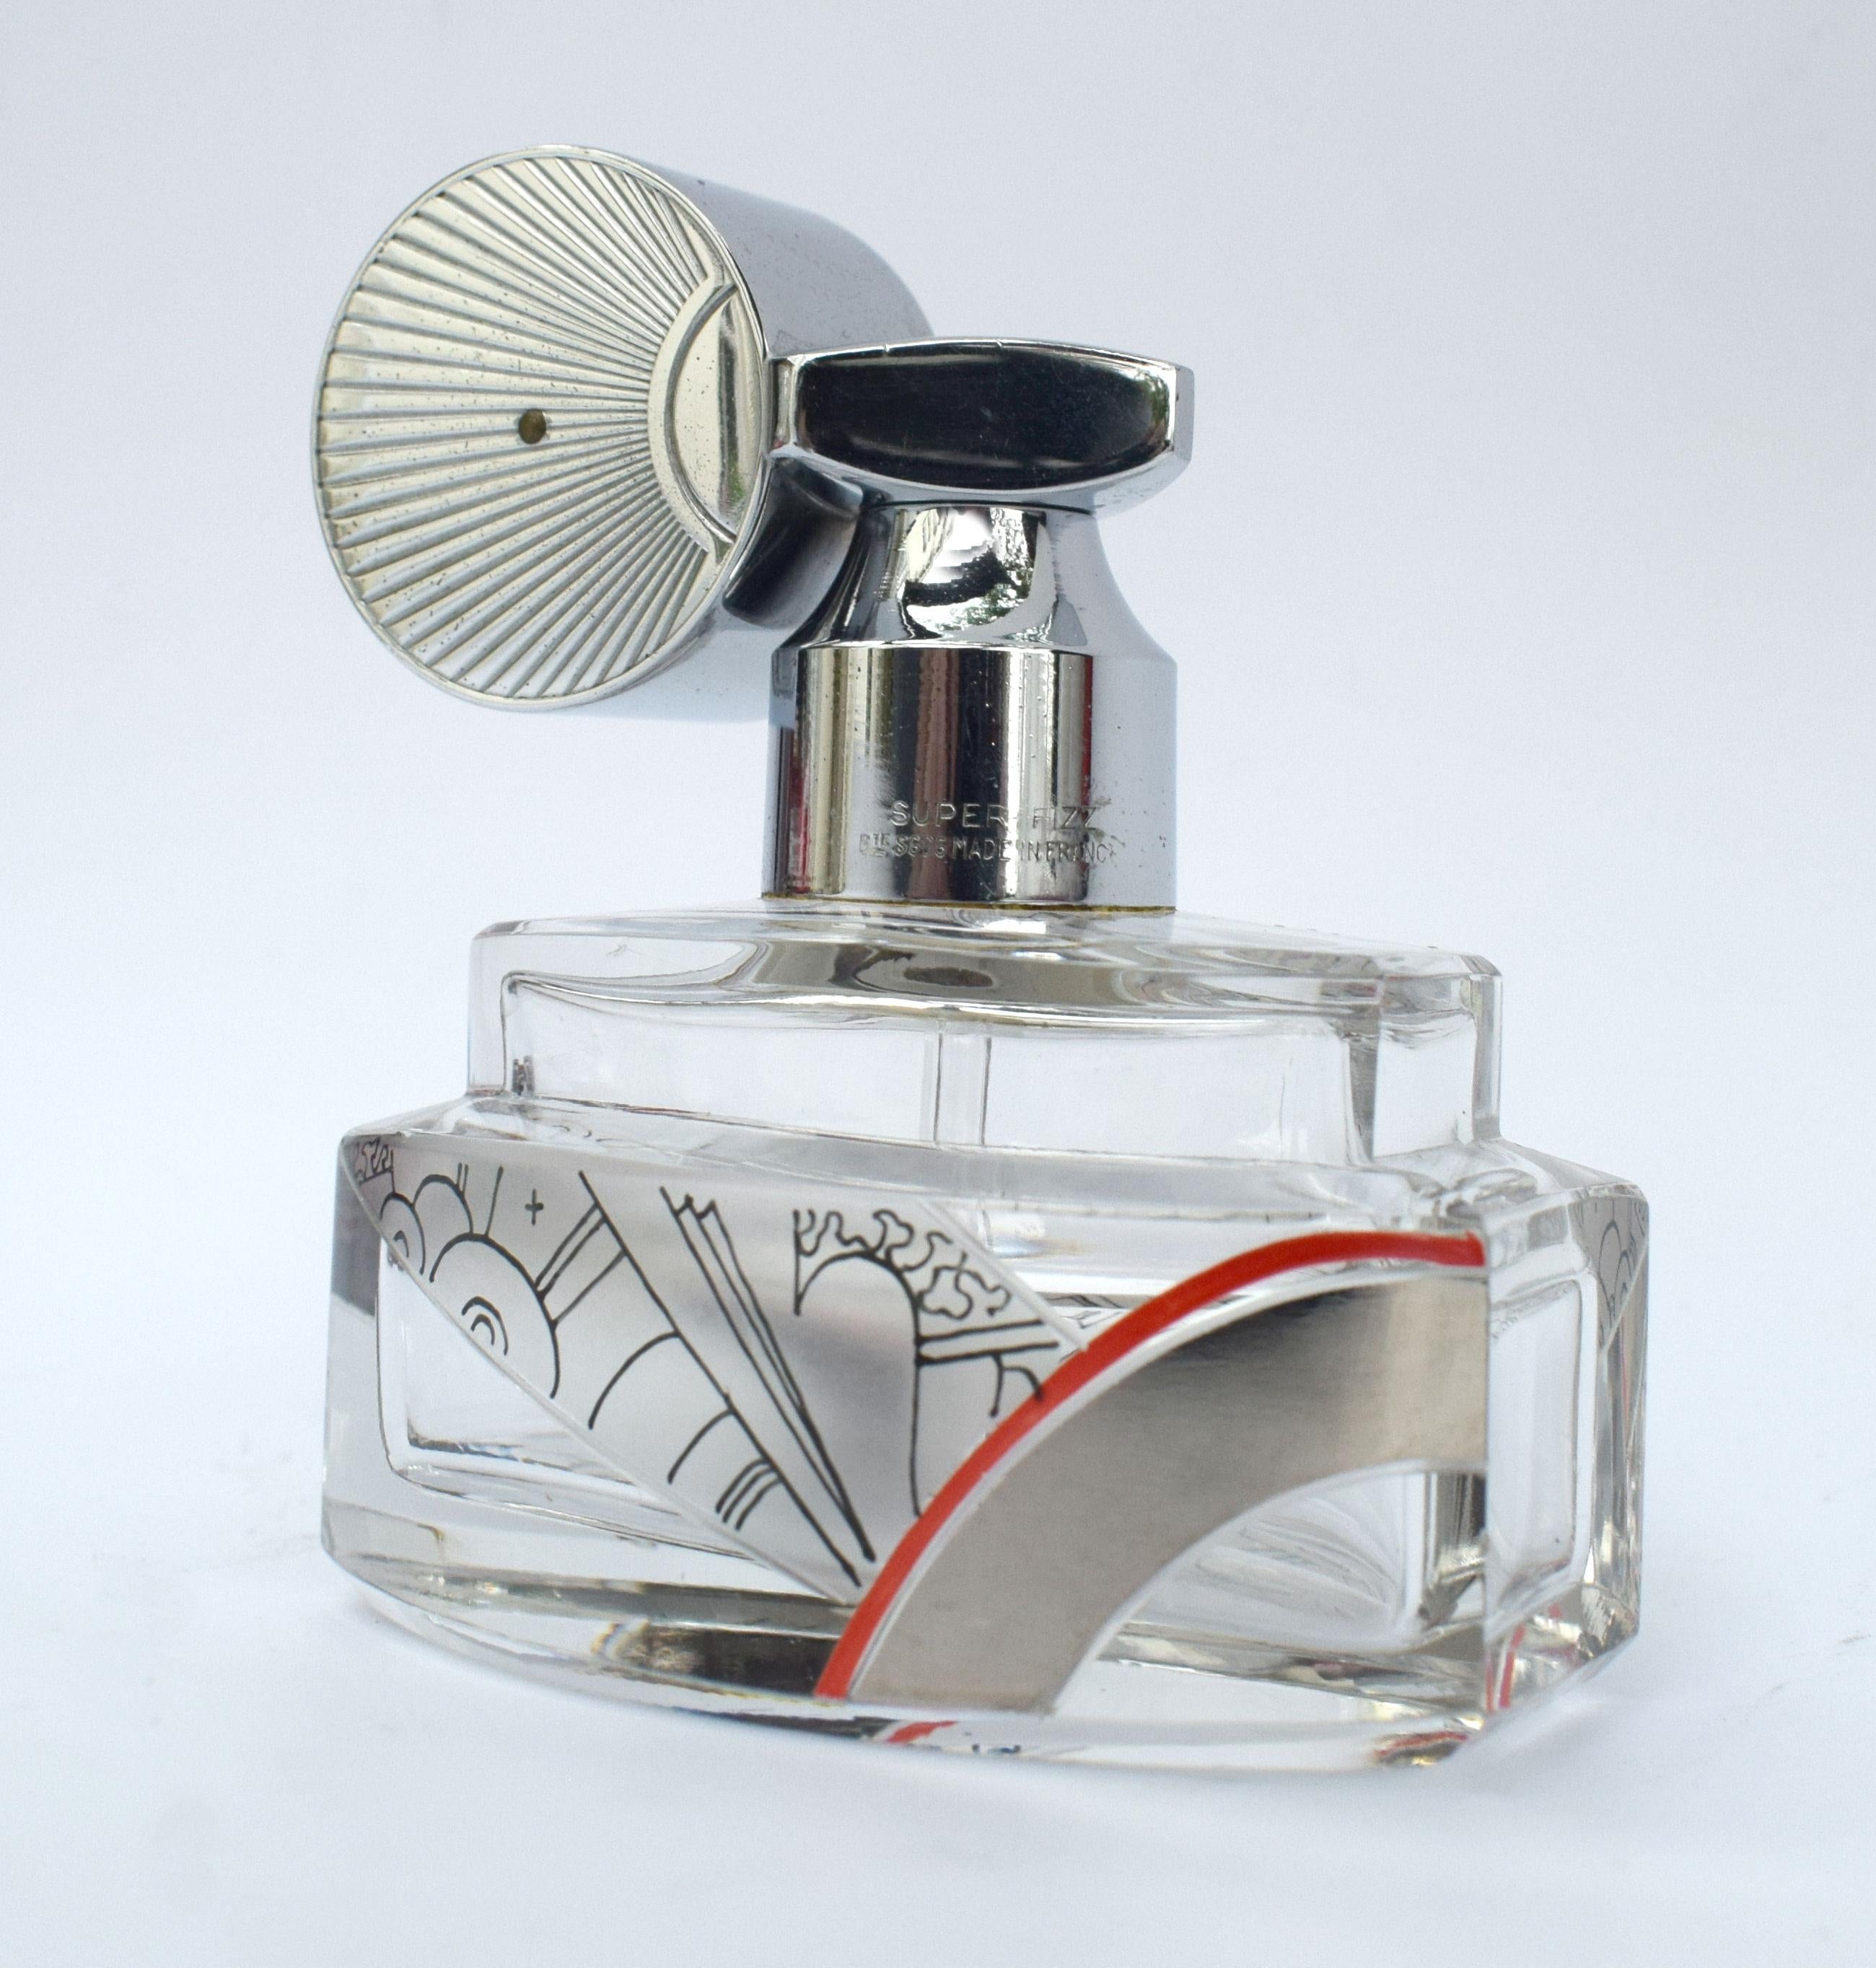 A beautiful Art Deco glass and chrome scent atomizer dating to the 1930s very much in the style of Karl Palda. Everything works as it should and the glass dauper is present and undamaged. The enamel and etched decoration is in superb condition and